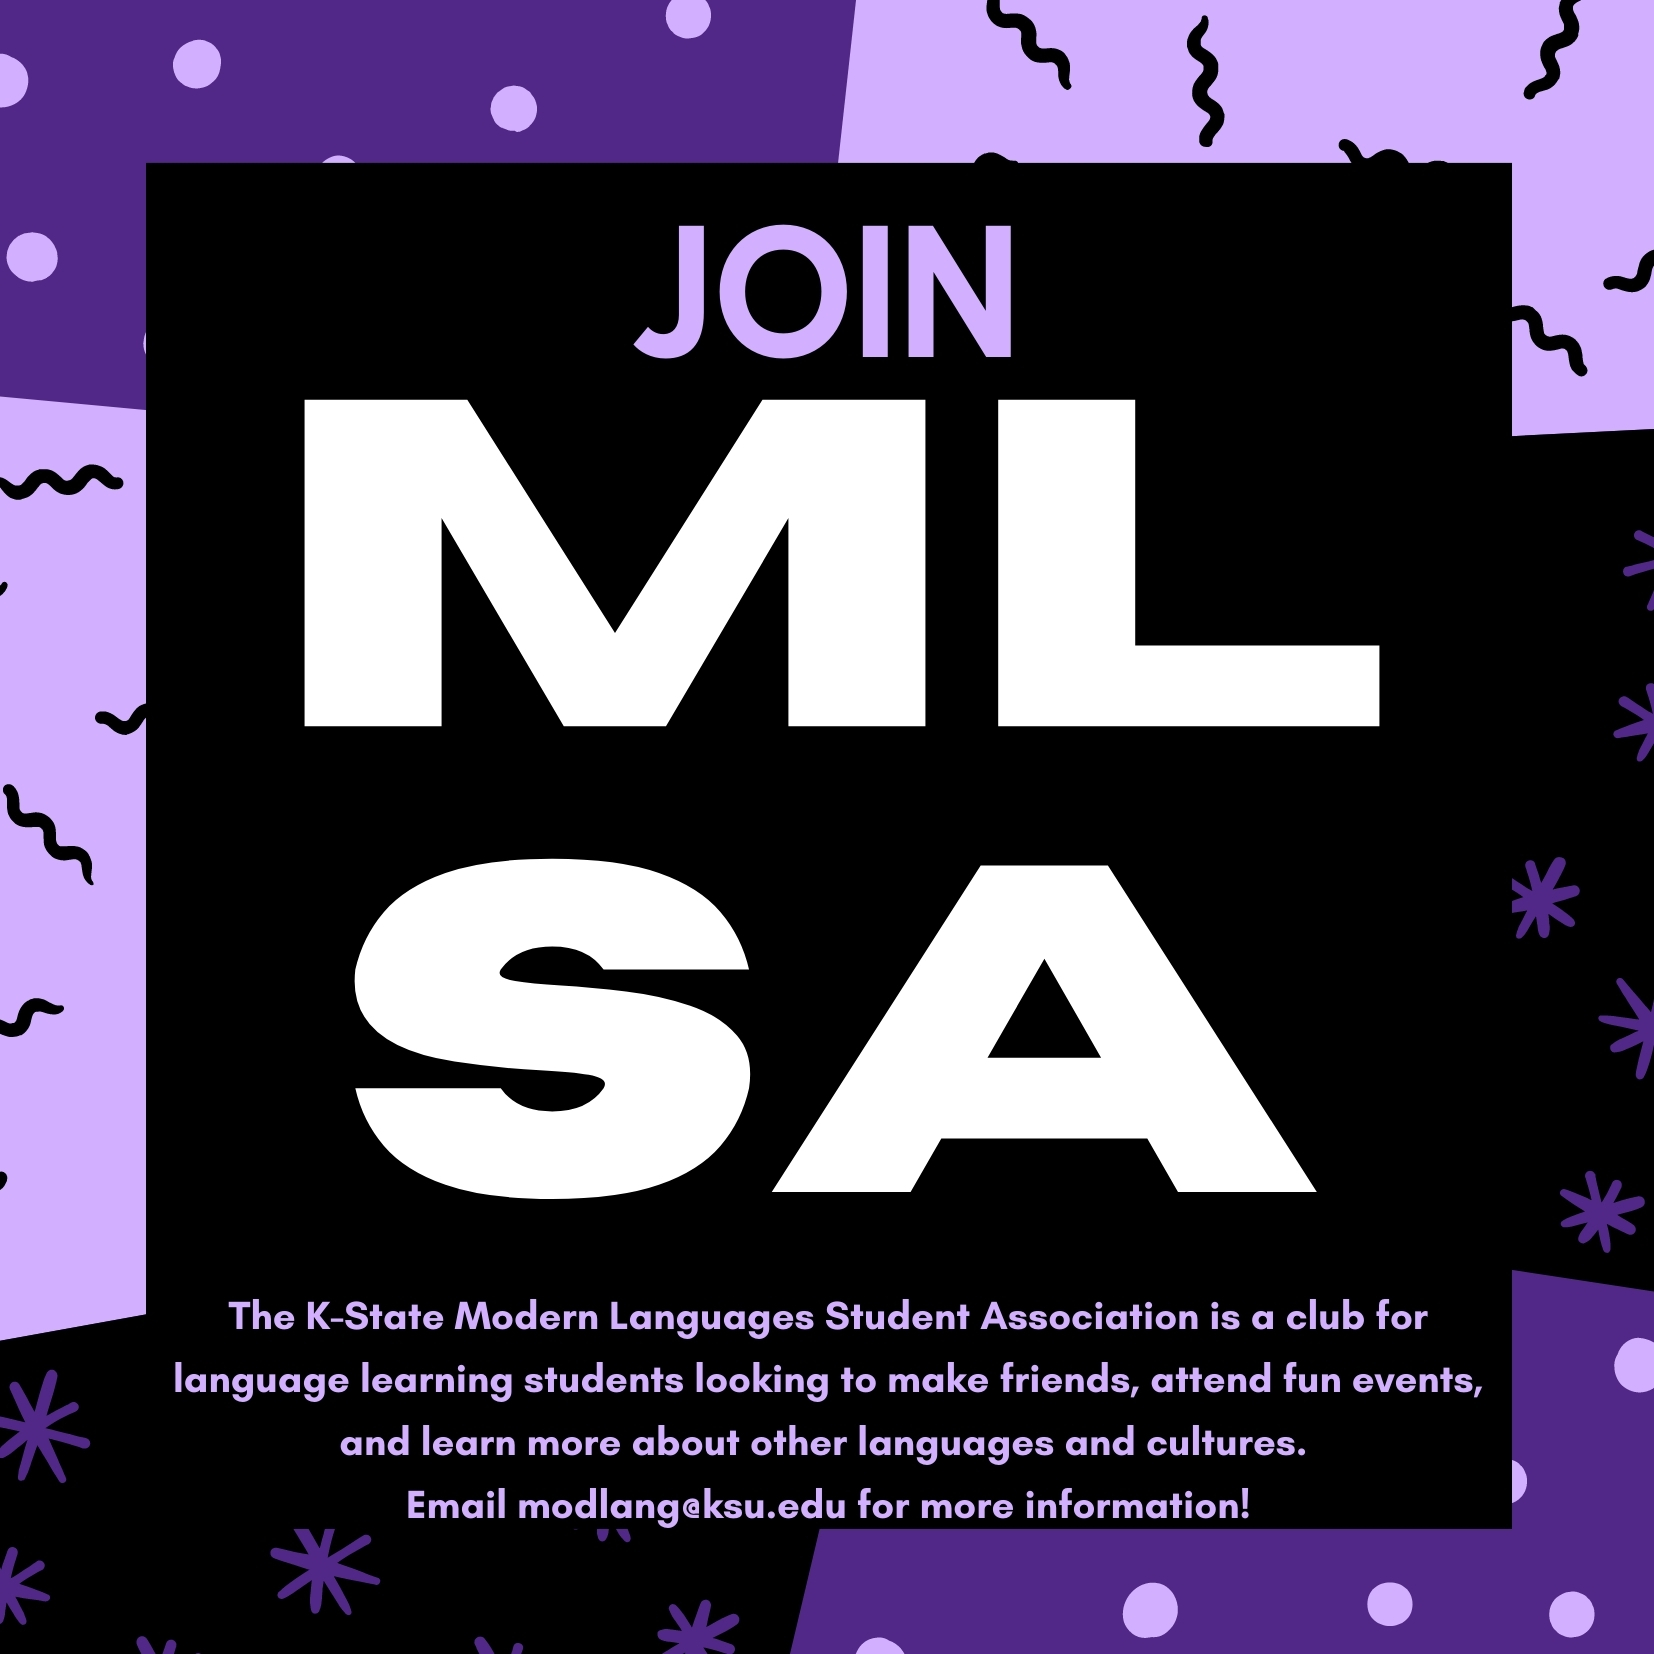 Poster that says "Join MLSA: The K-State Modern Languages Student Association is a club for language learning students looking to make friends, attend fun events, and learn more about other languages and cultures.  Email modlang@ksu.edu for more information!